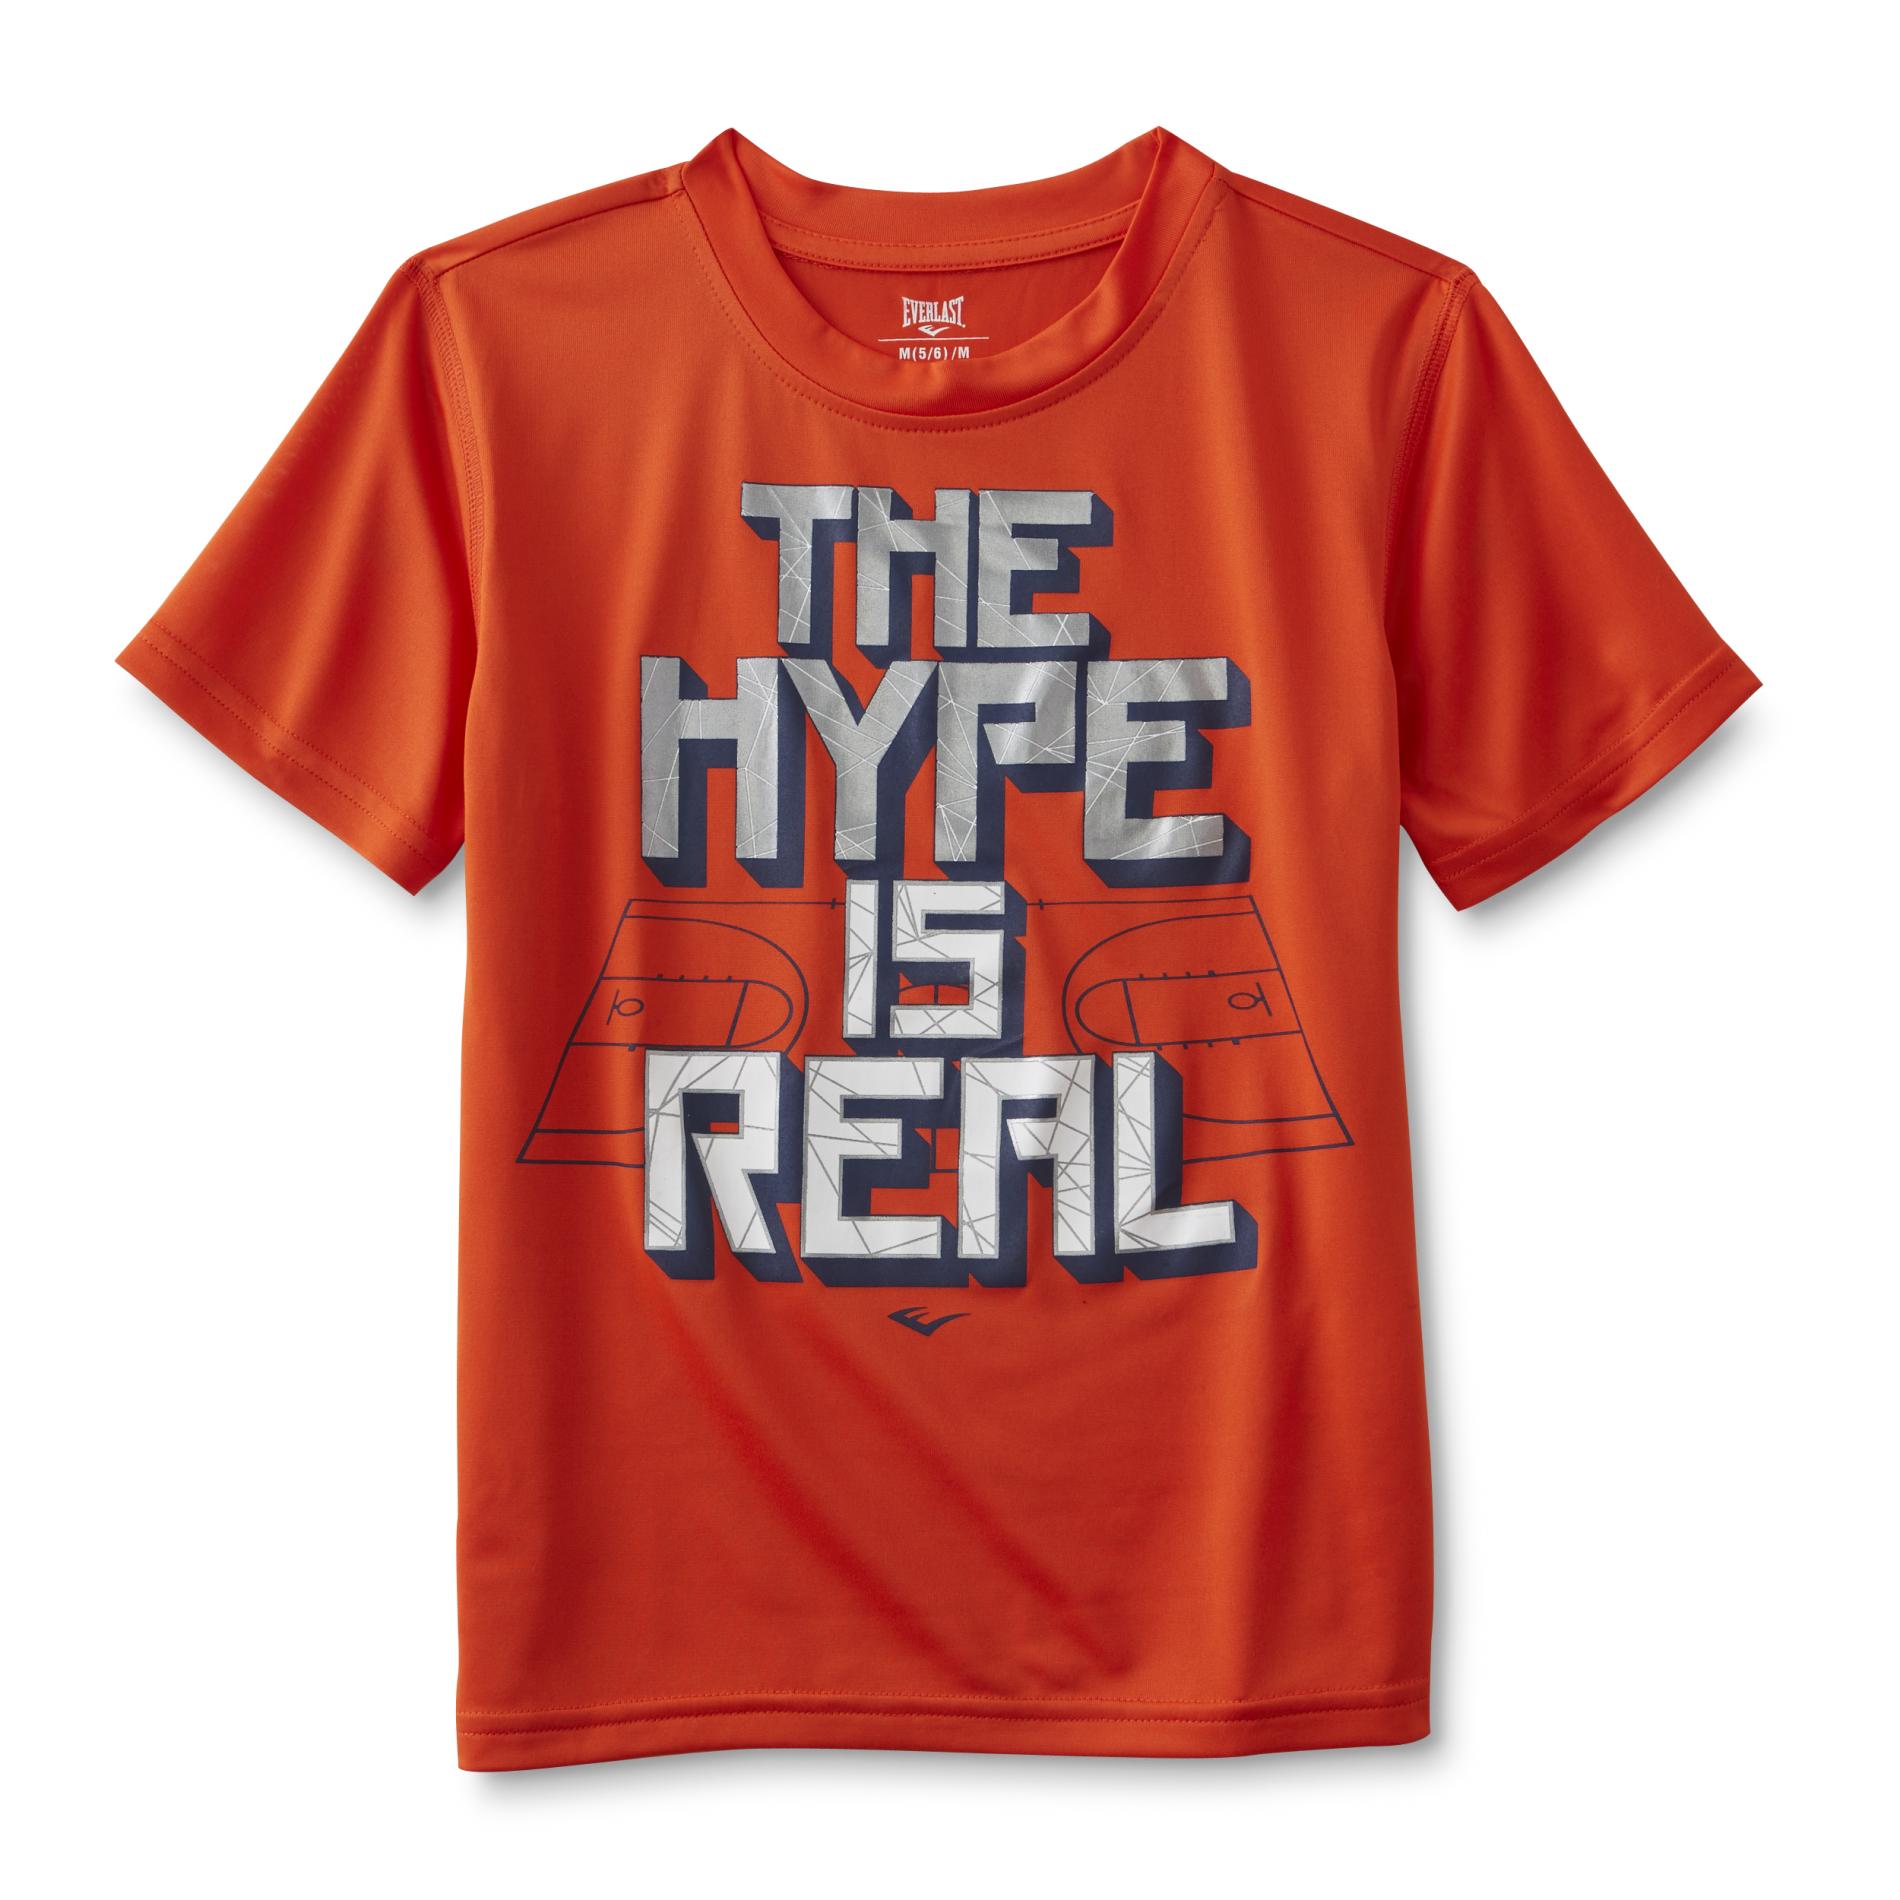 Everlast&reg; Boy's Graphic Athletic T-Shirt - The Hype Is Real